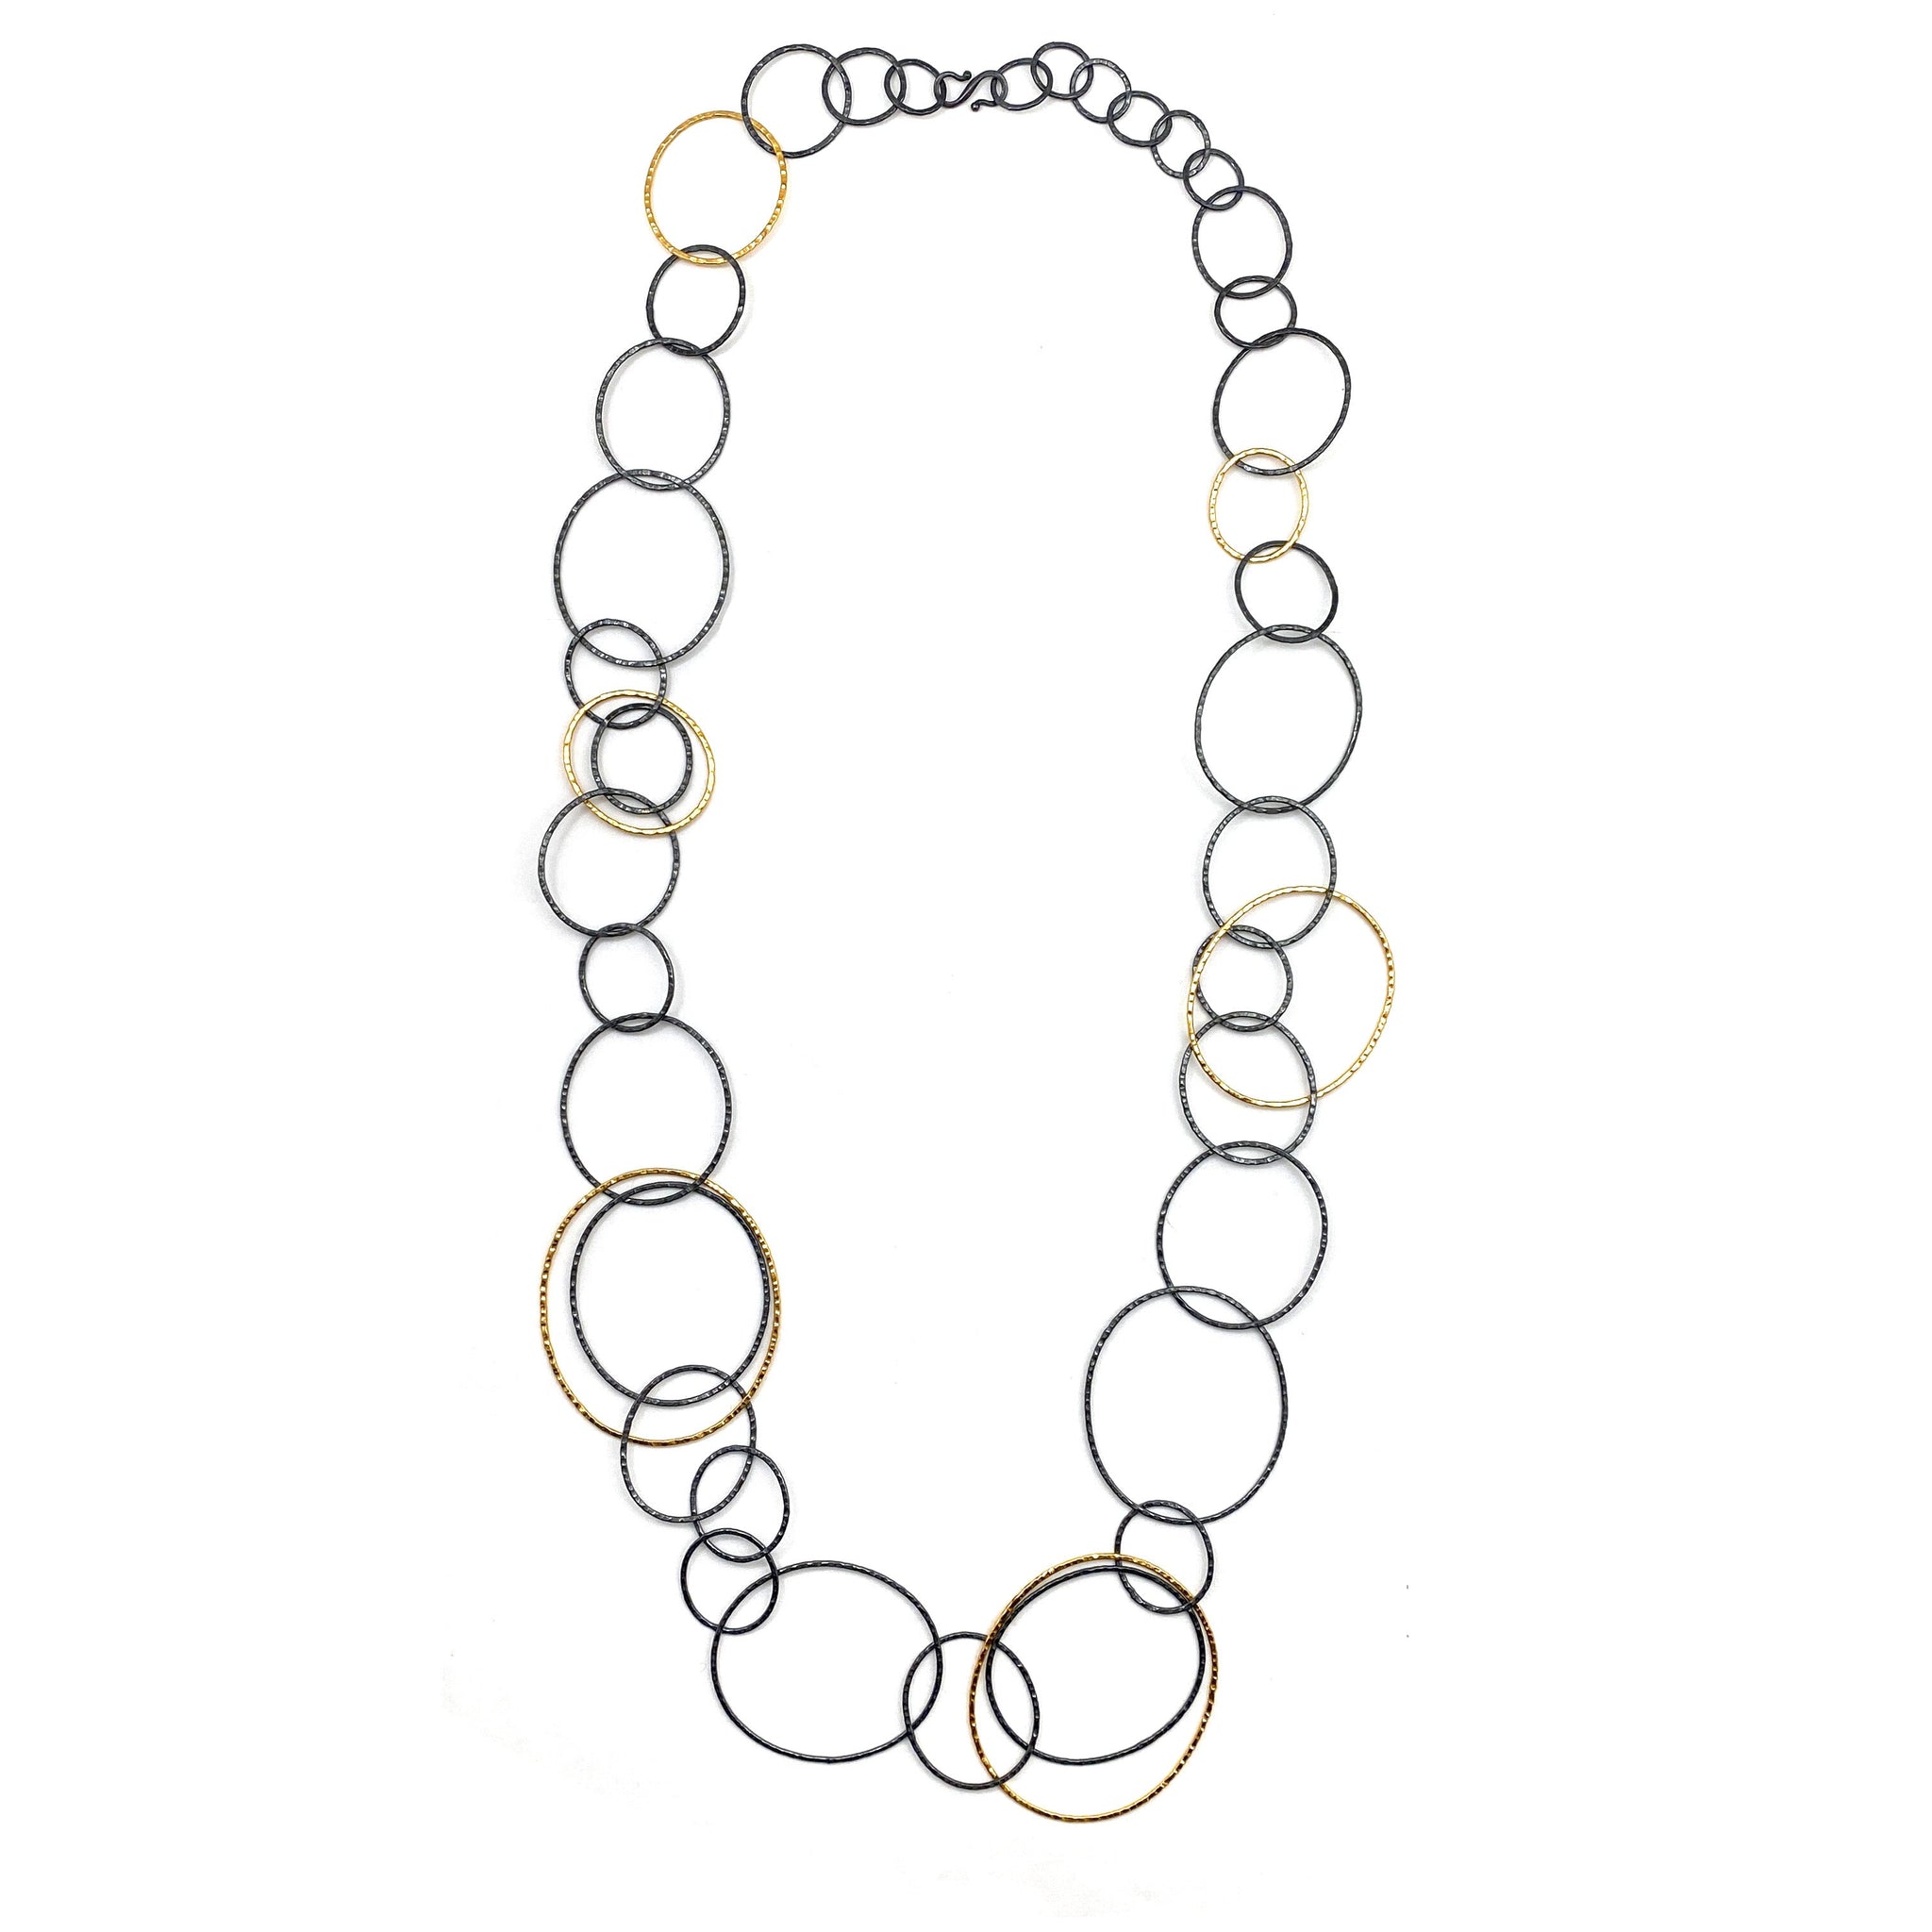 Looped - Permanent Jewelry at Pistachios!